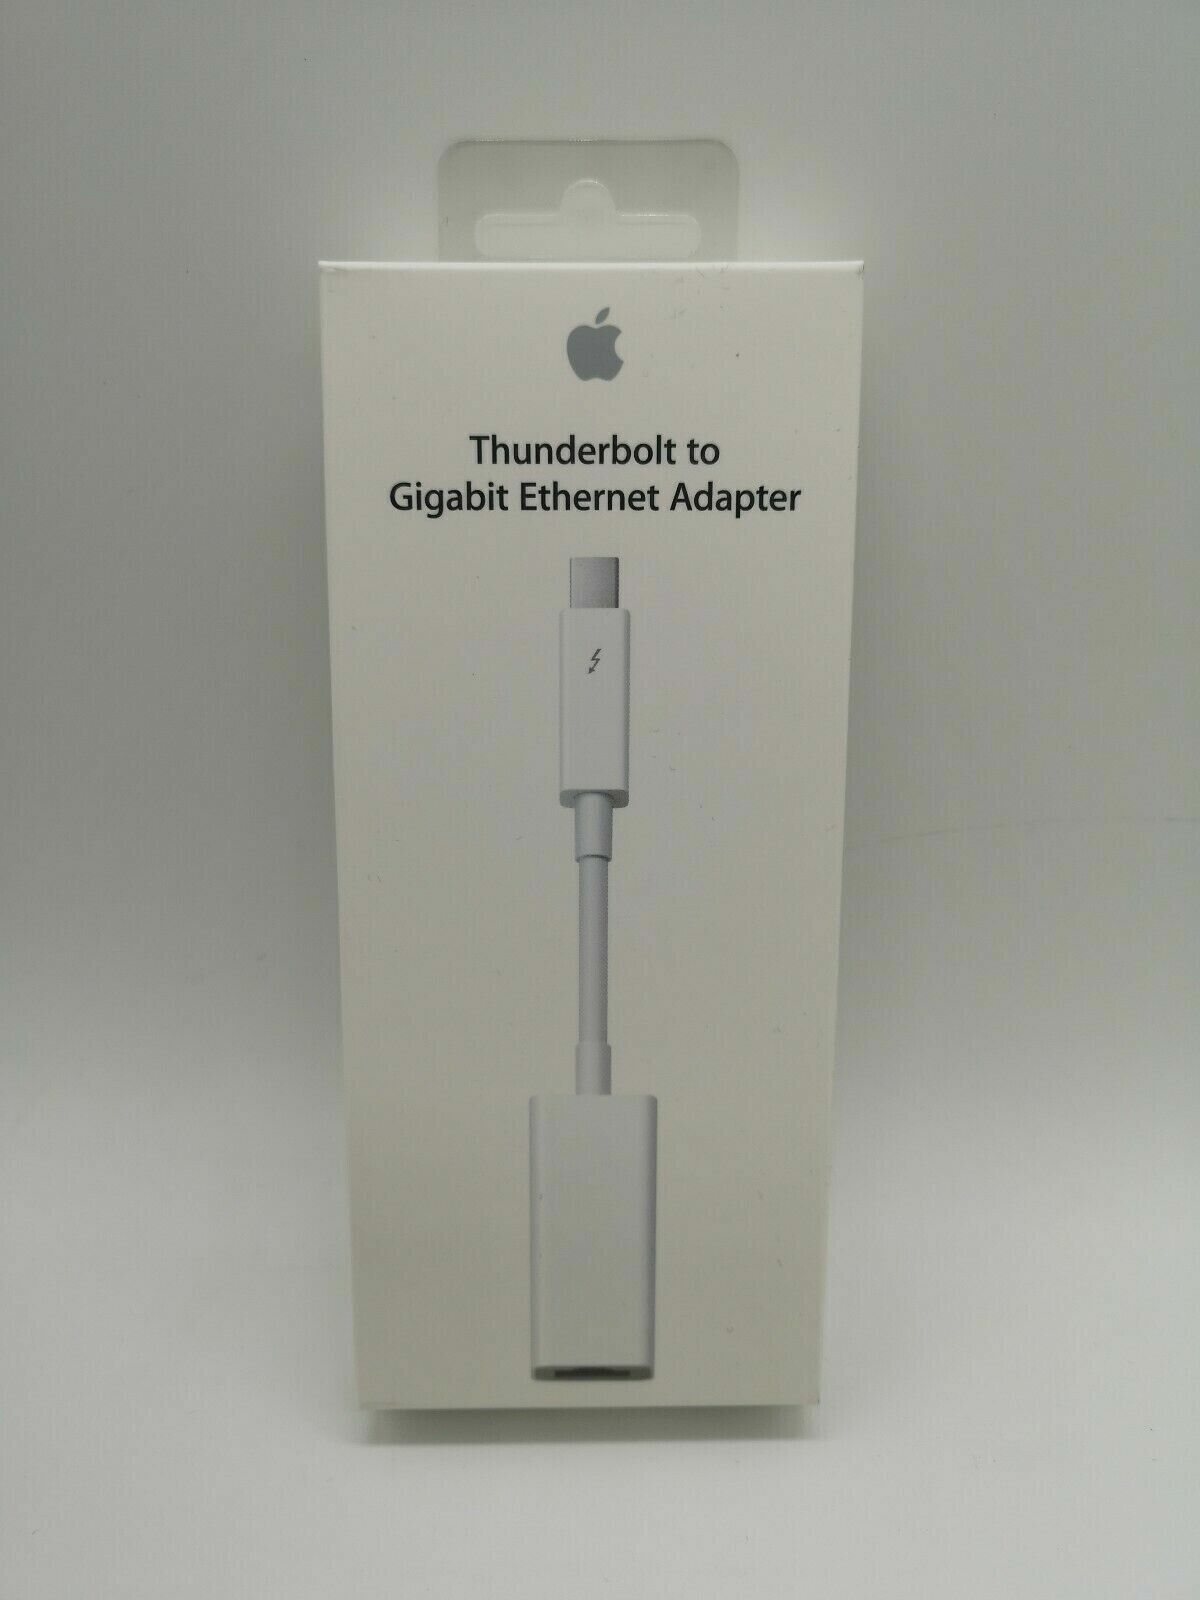 NEW Sealed OEM Apple A1433 Thunderbolt to Gigabit Ethernet Adapter - MD463LL/A